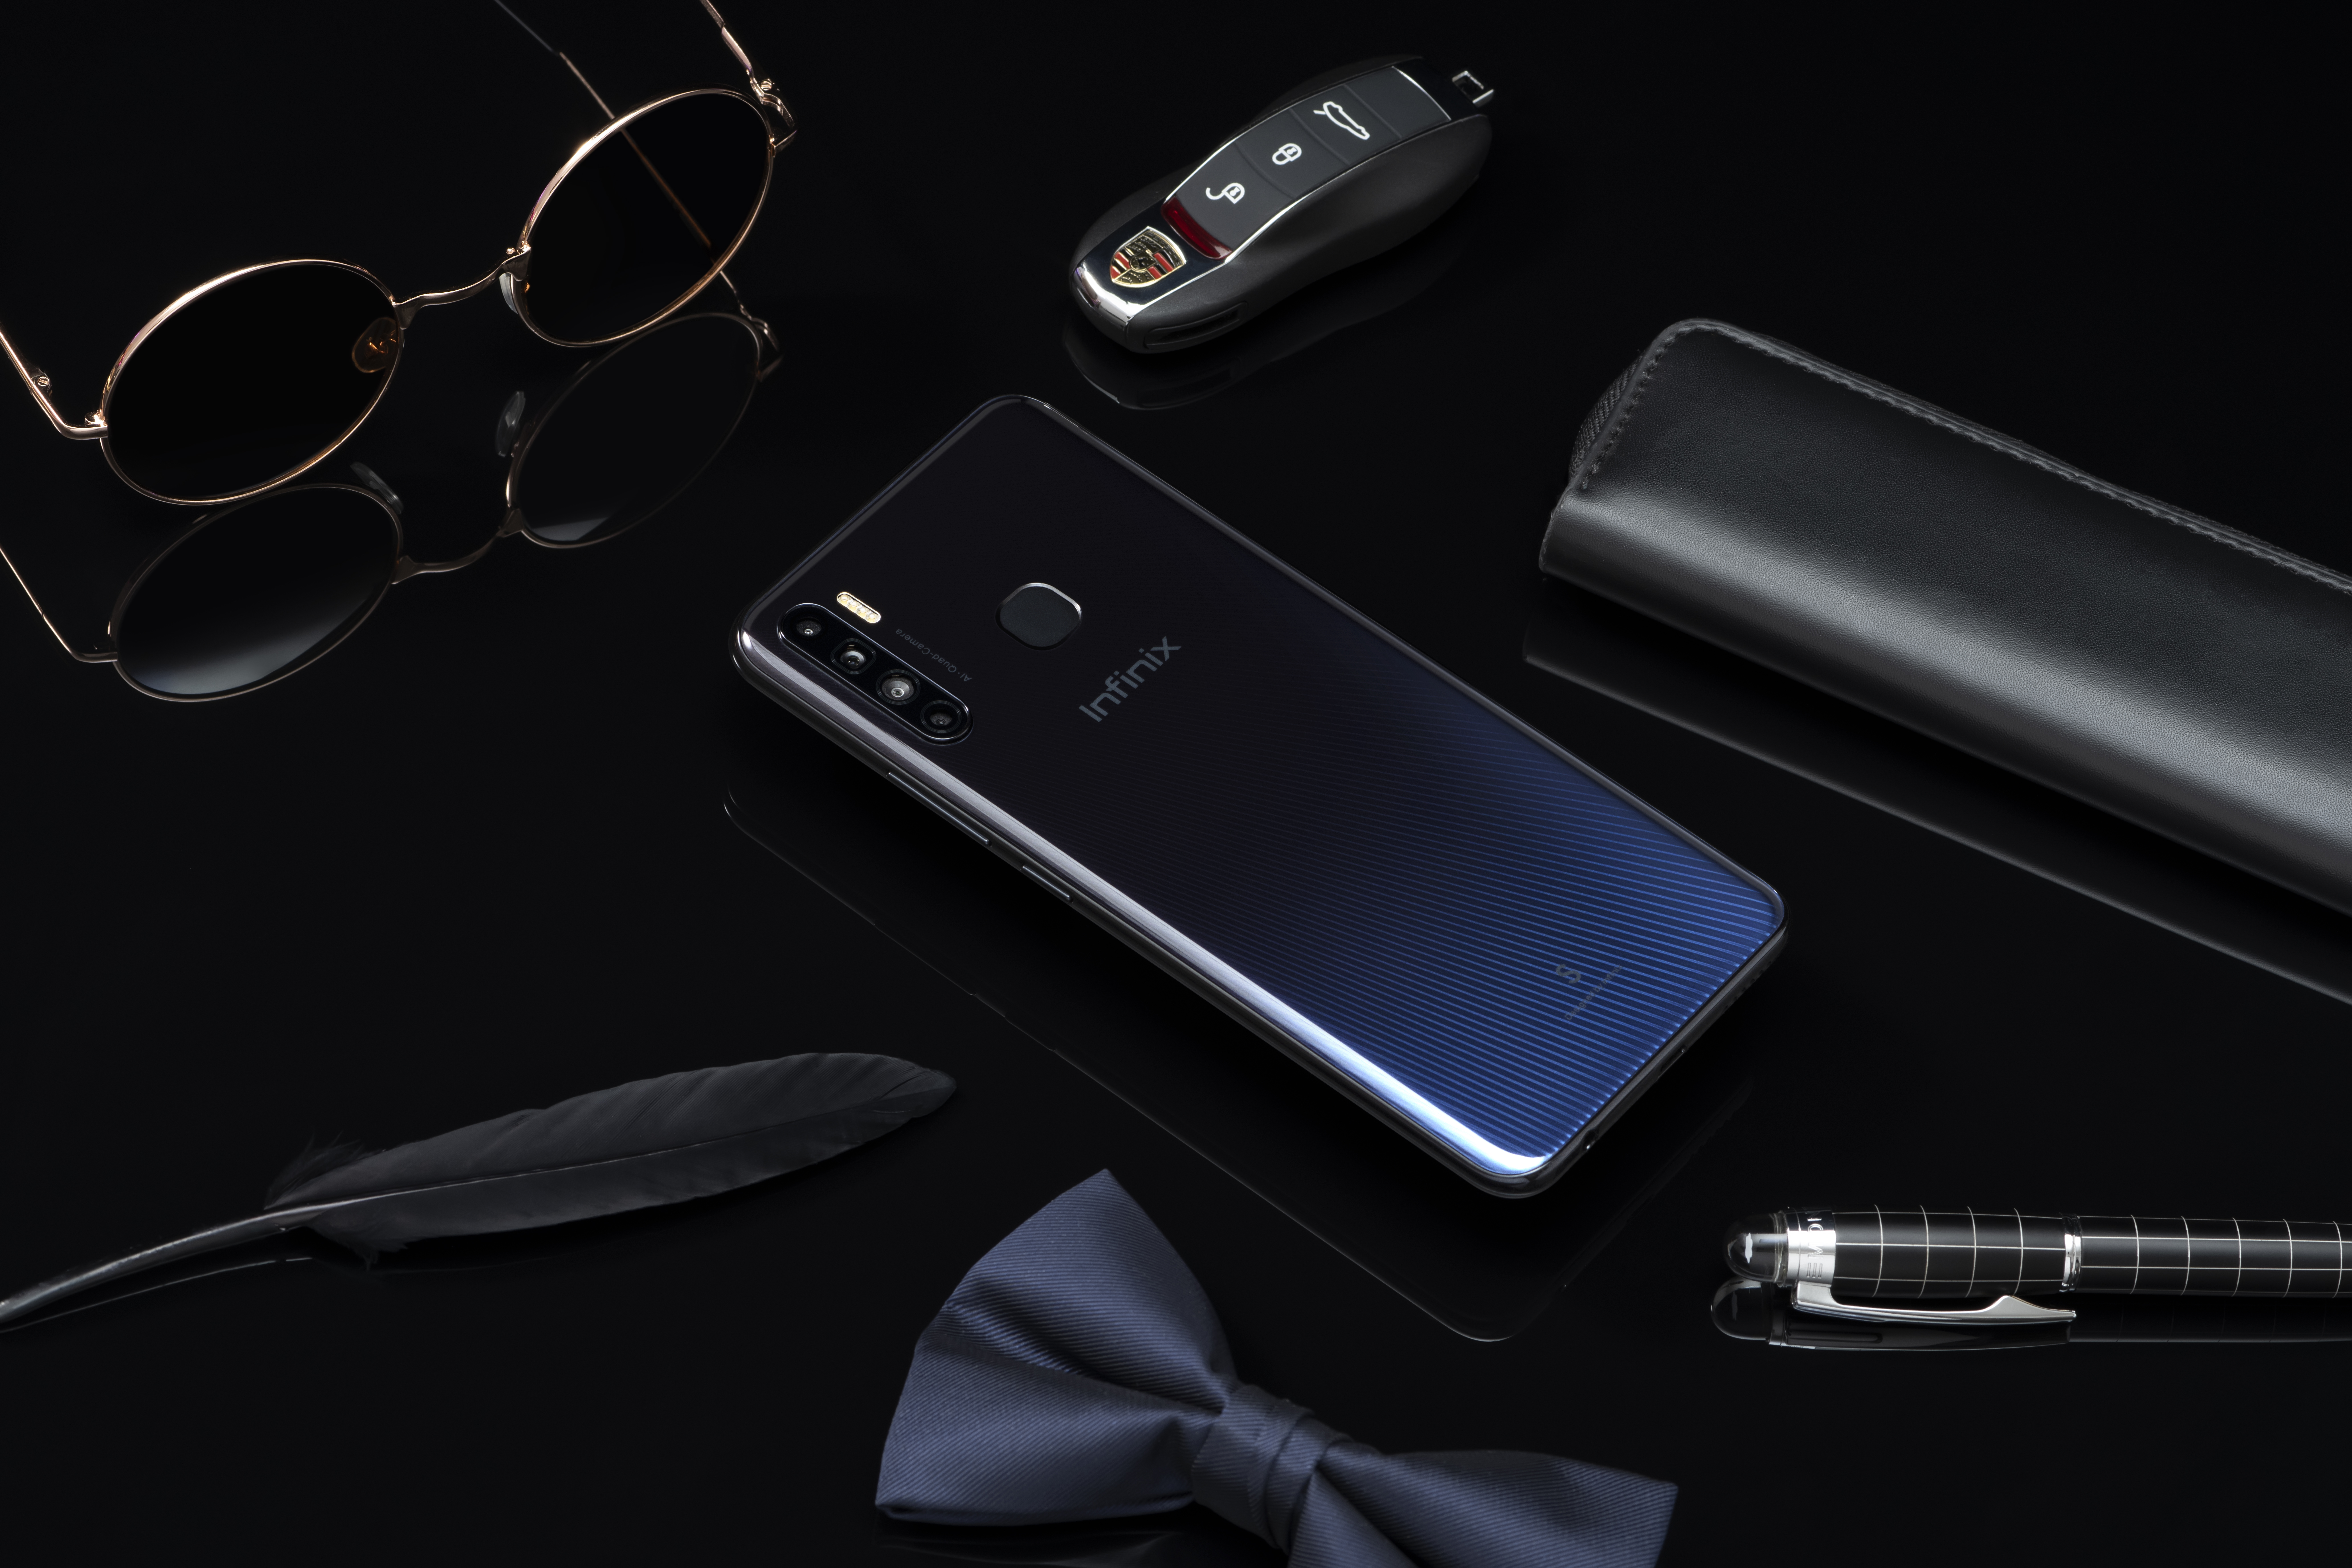 Infinix innovatively changing lifestyle of its customers